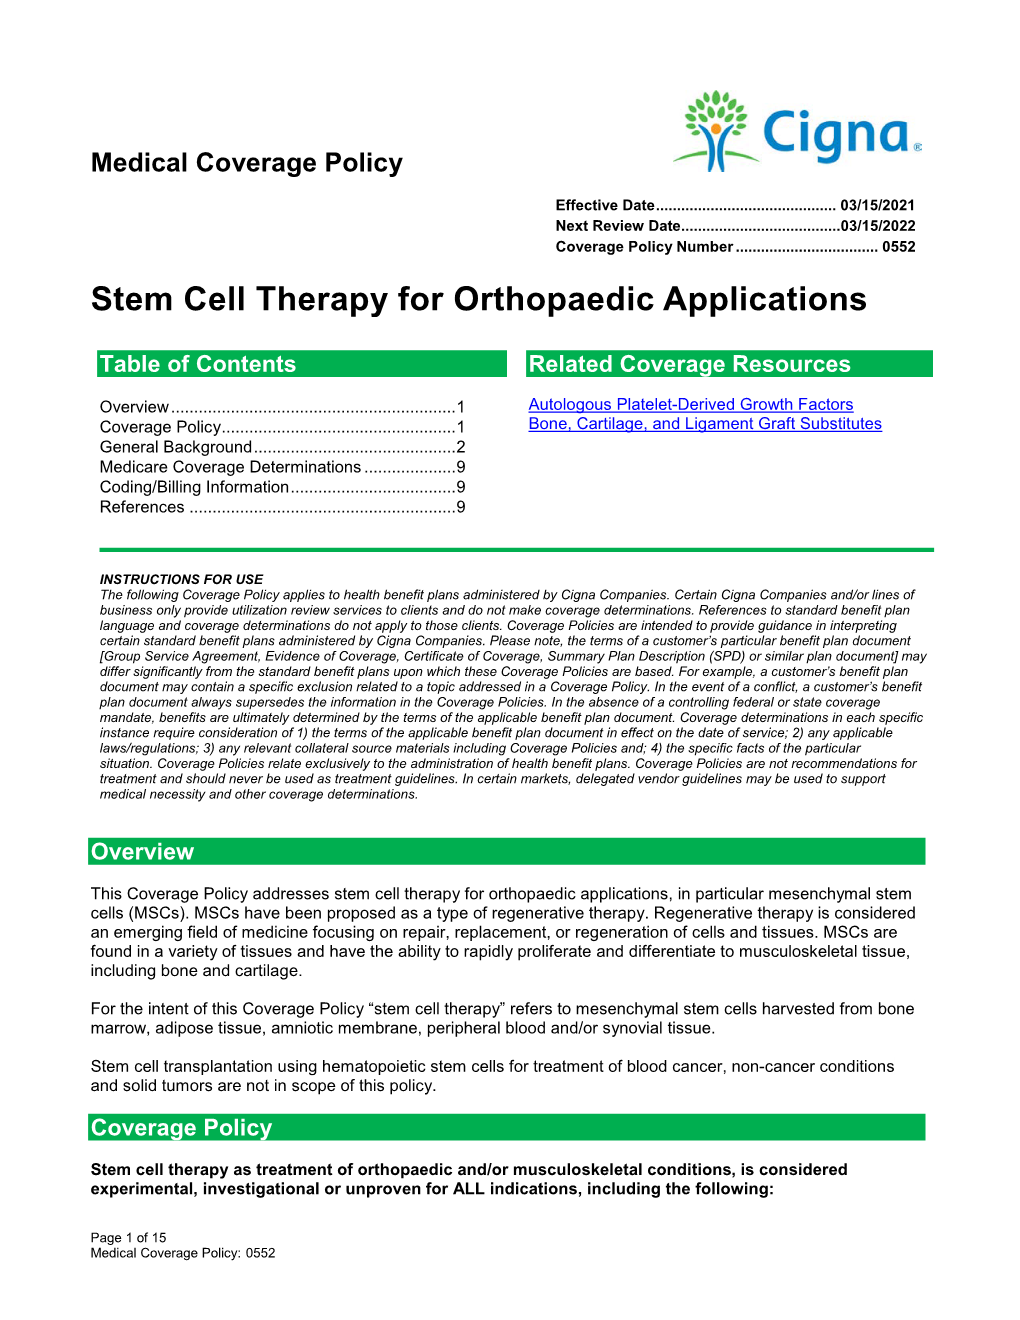 Stem Cell Therapy for Orthopaedic Applications – (0552)